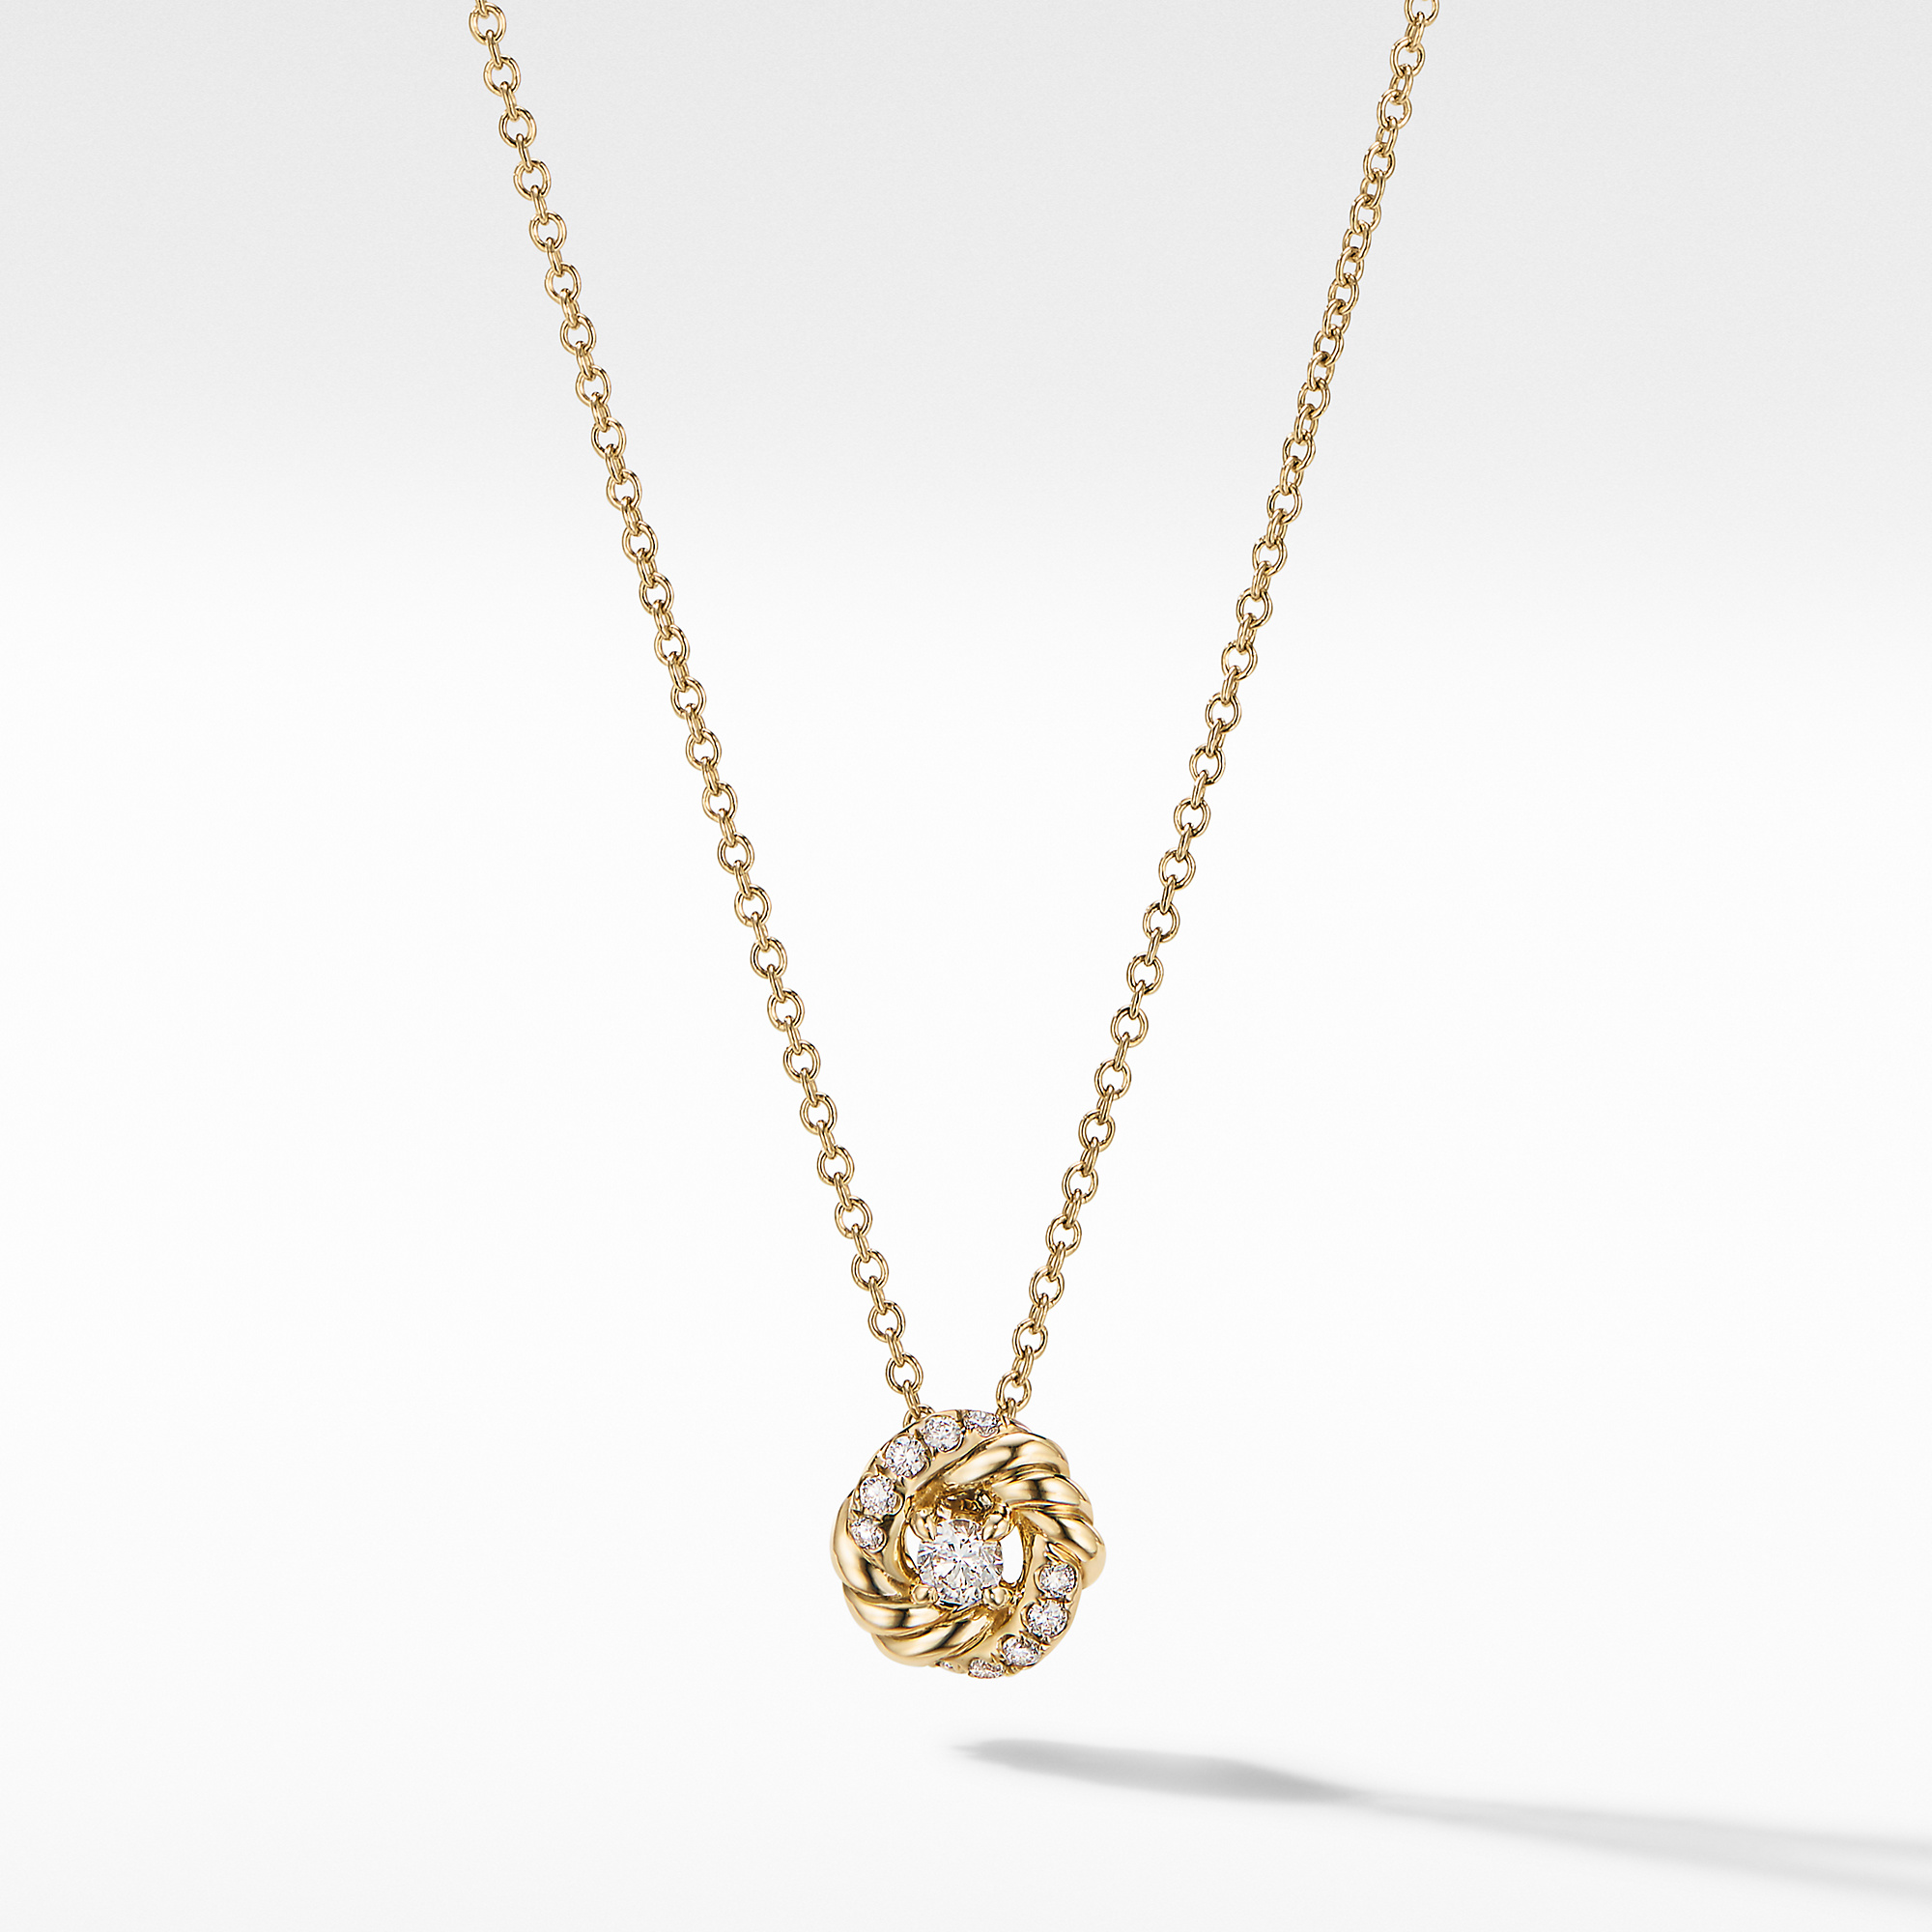 Petite Infinity Pendant Necklace in 18K Yellow Gold with Diamonds, 8mm